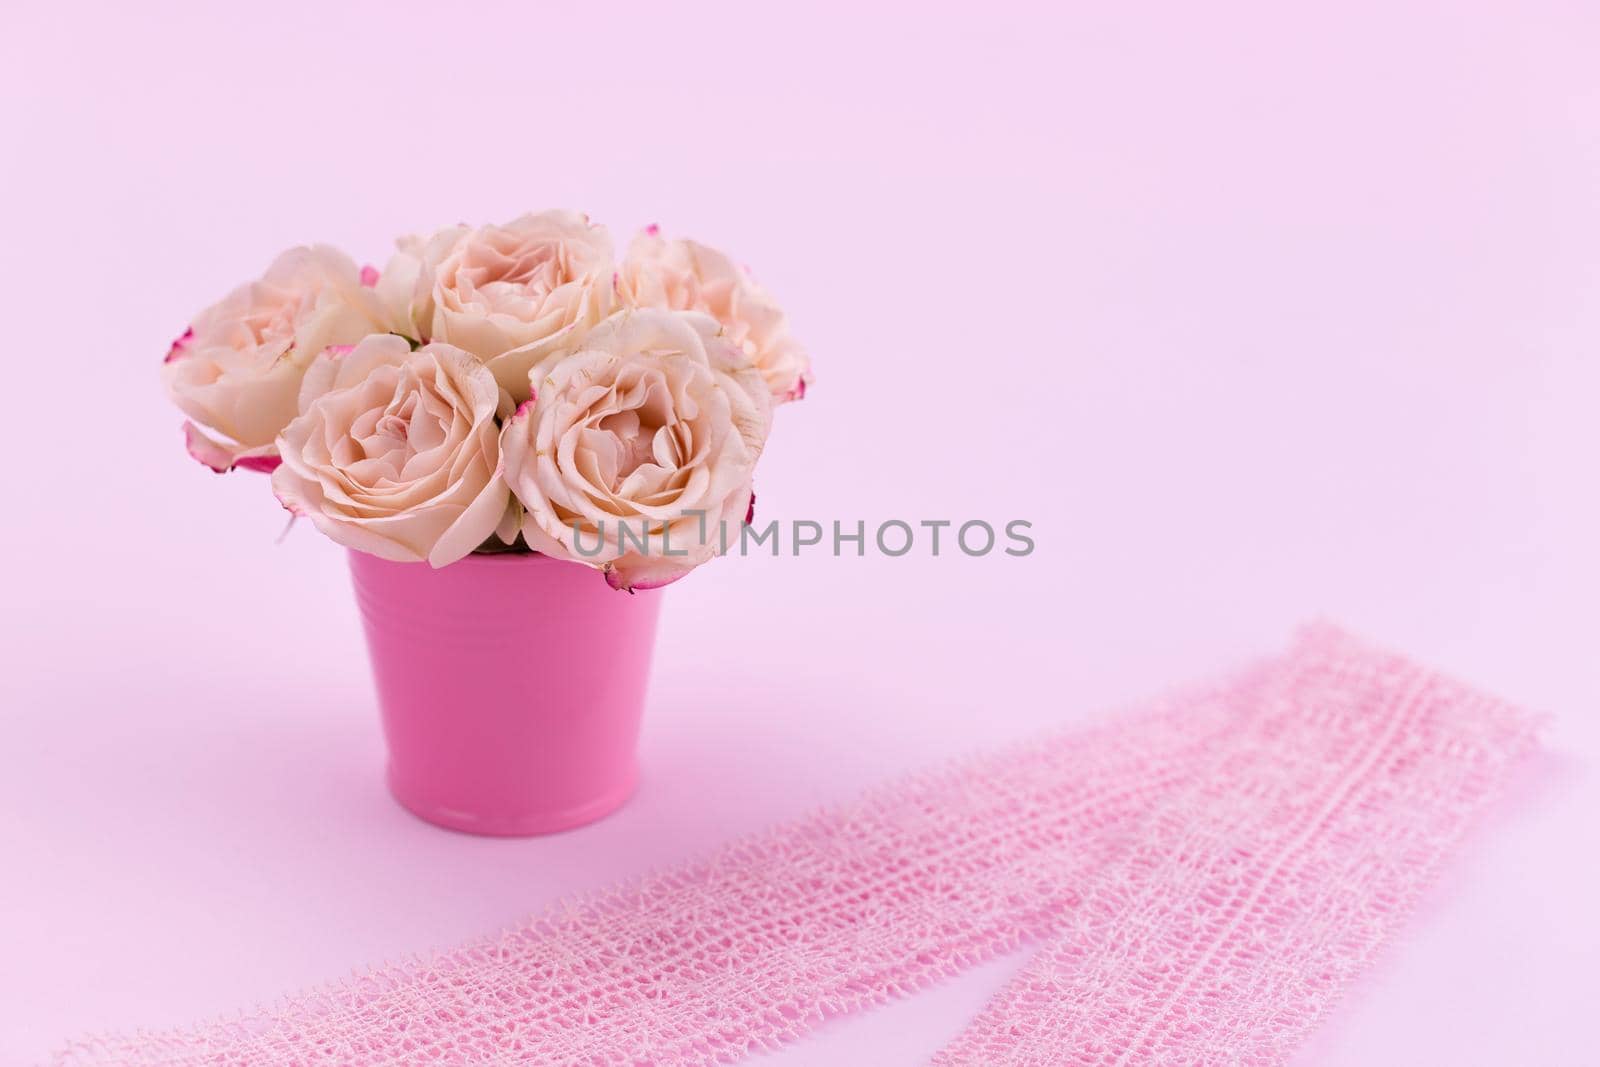 A bouquet of beautiful roses stands in a small bucket on a lace ribbon on a pink background with space for text. by lunarts